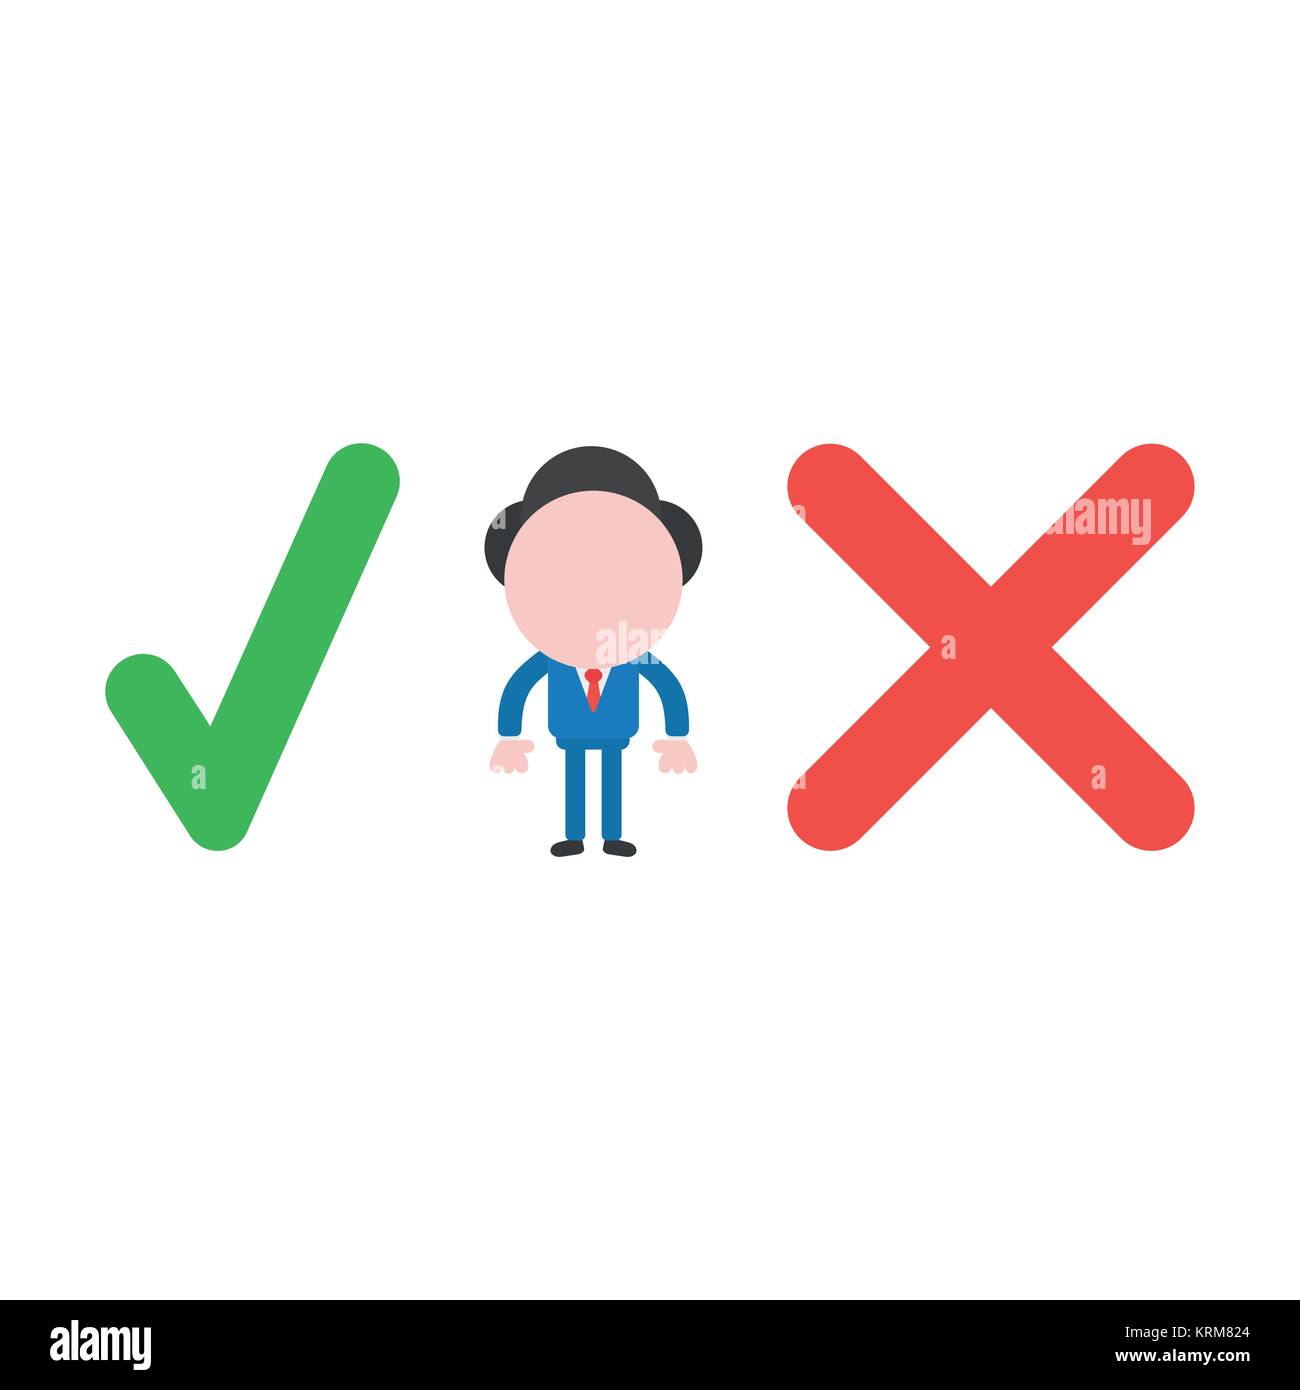 Vector cartoon illustration concept of faceless businessman mascot character between green check mark and red x mark symbol icon. Stock Vector